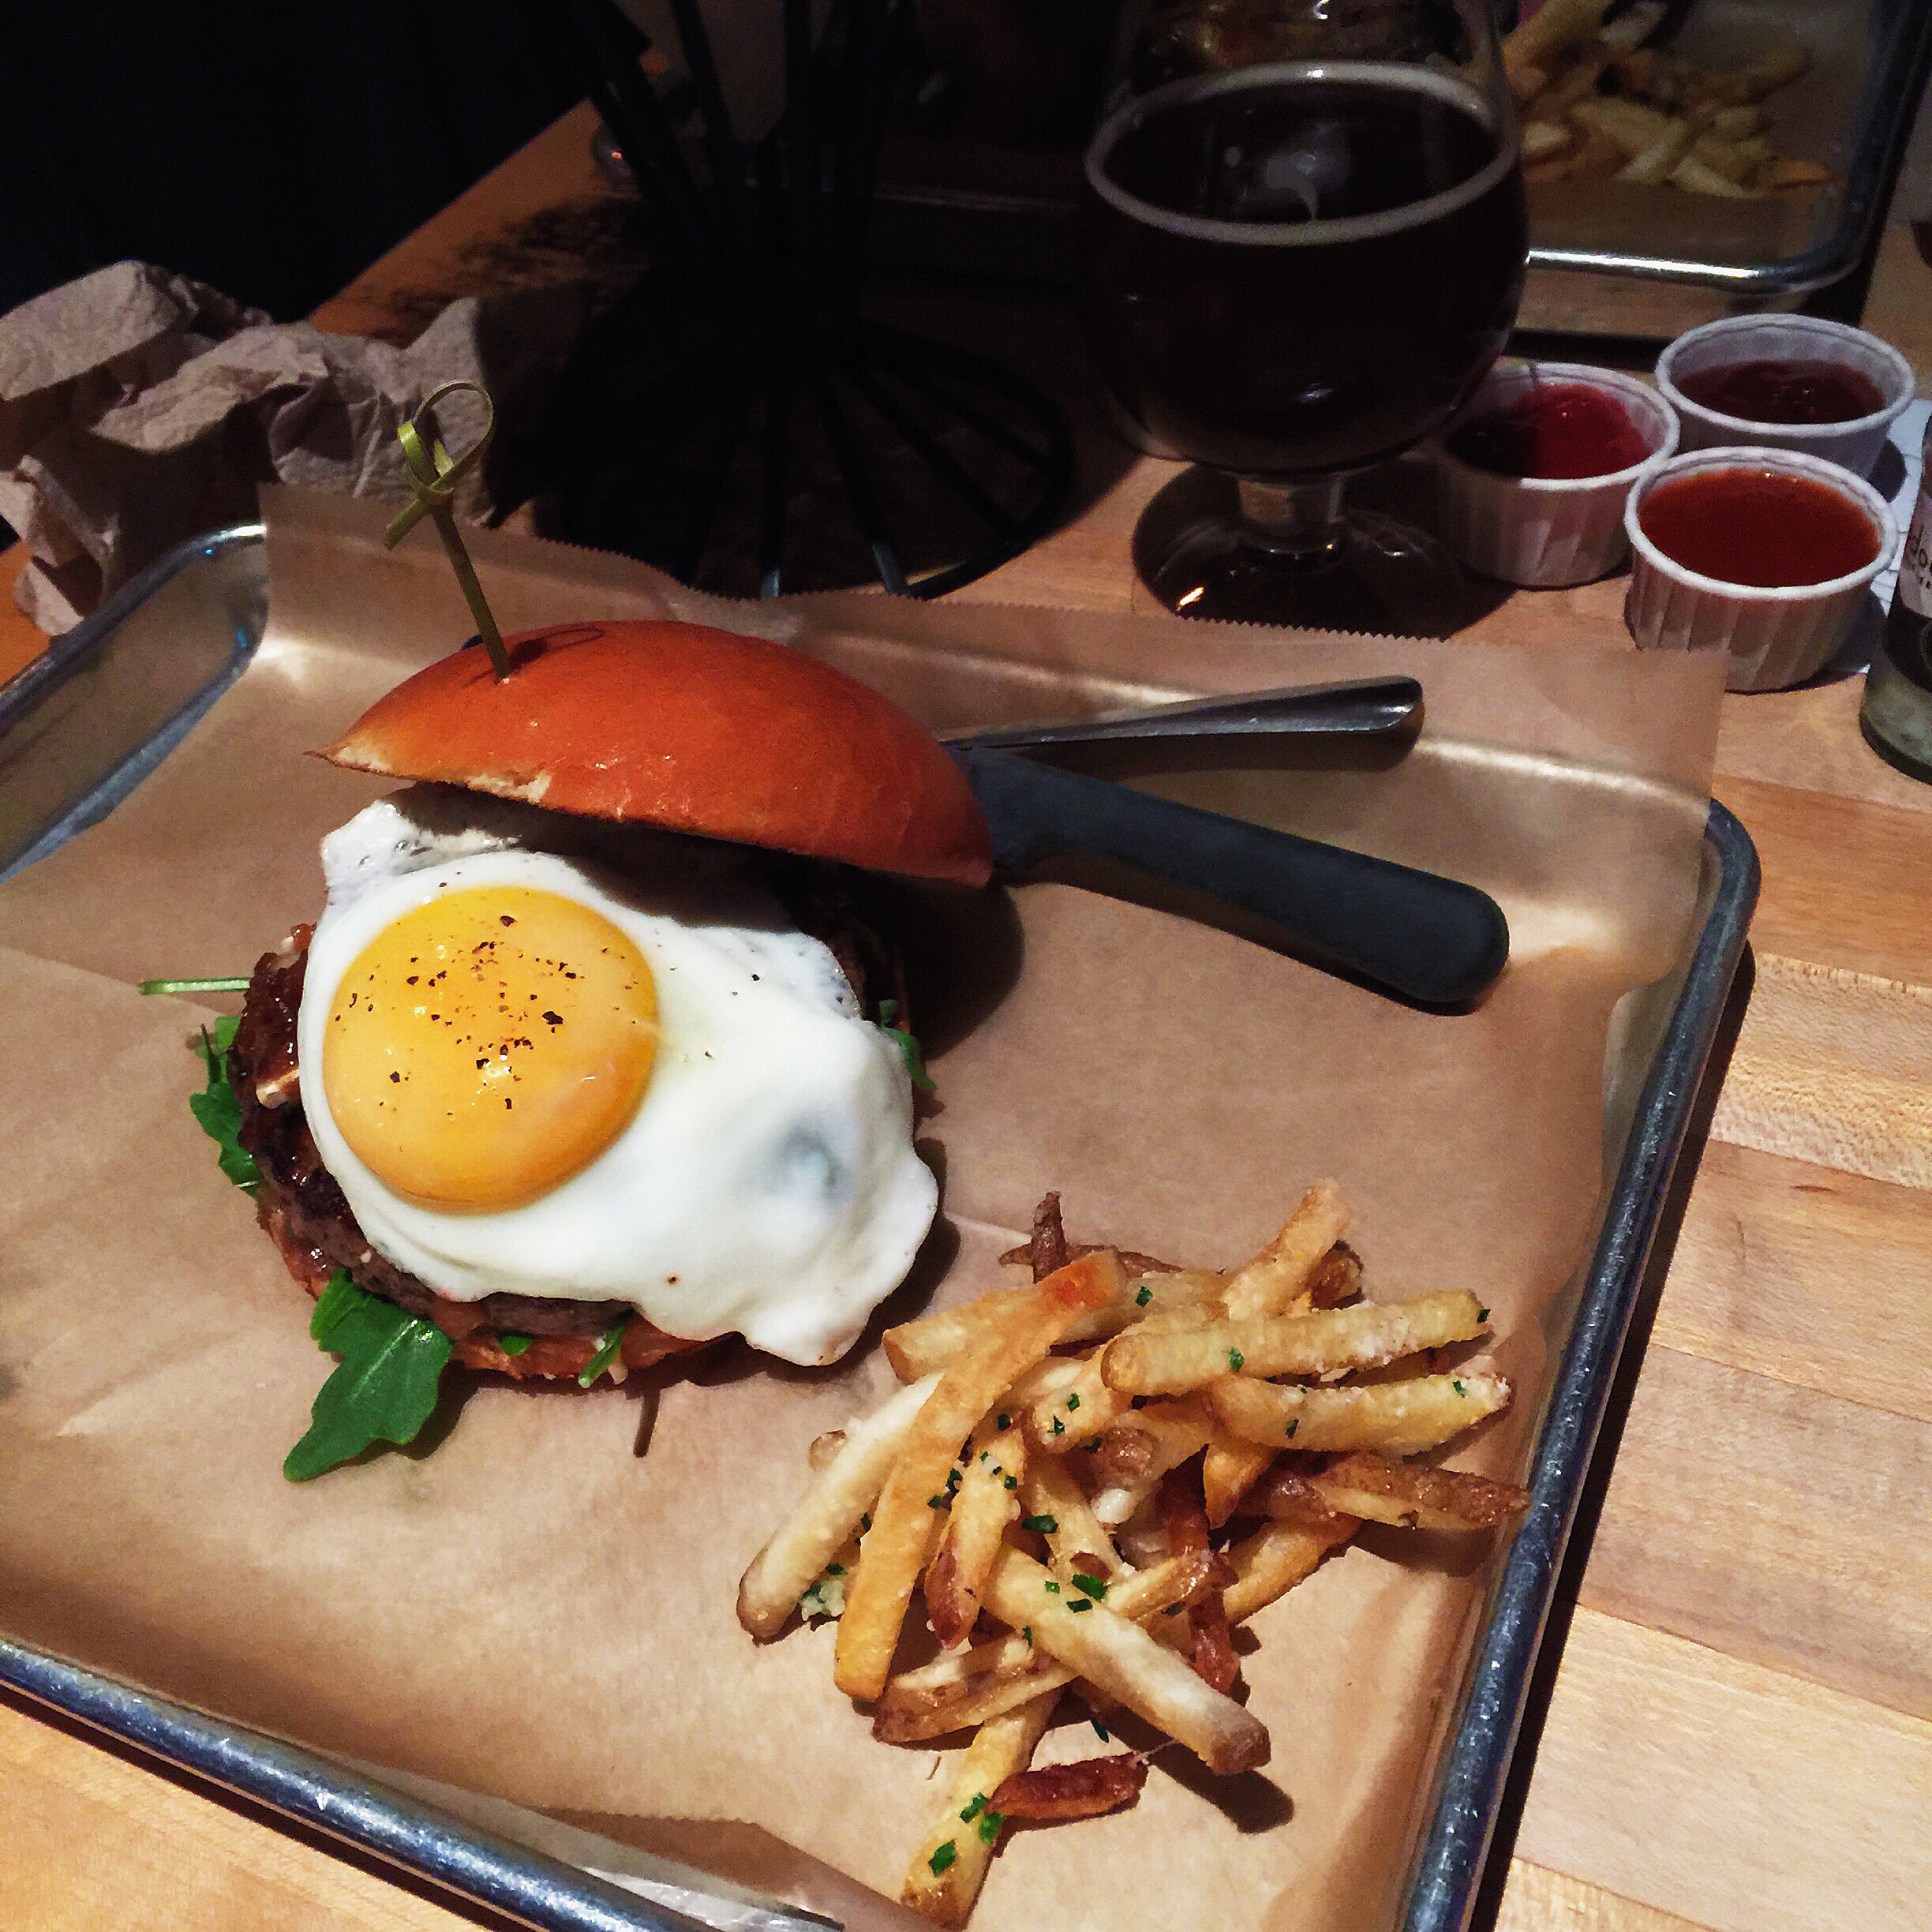   {hopdoddy's! my primetime with an added egg.}  